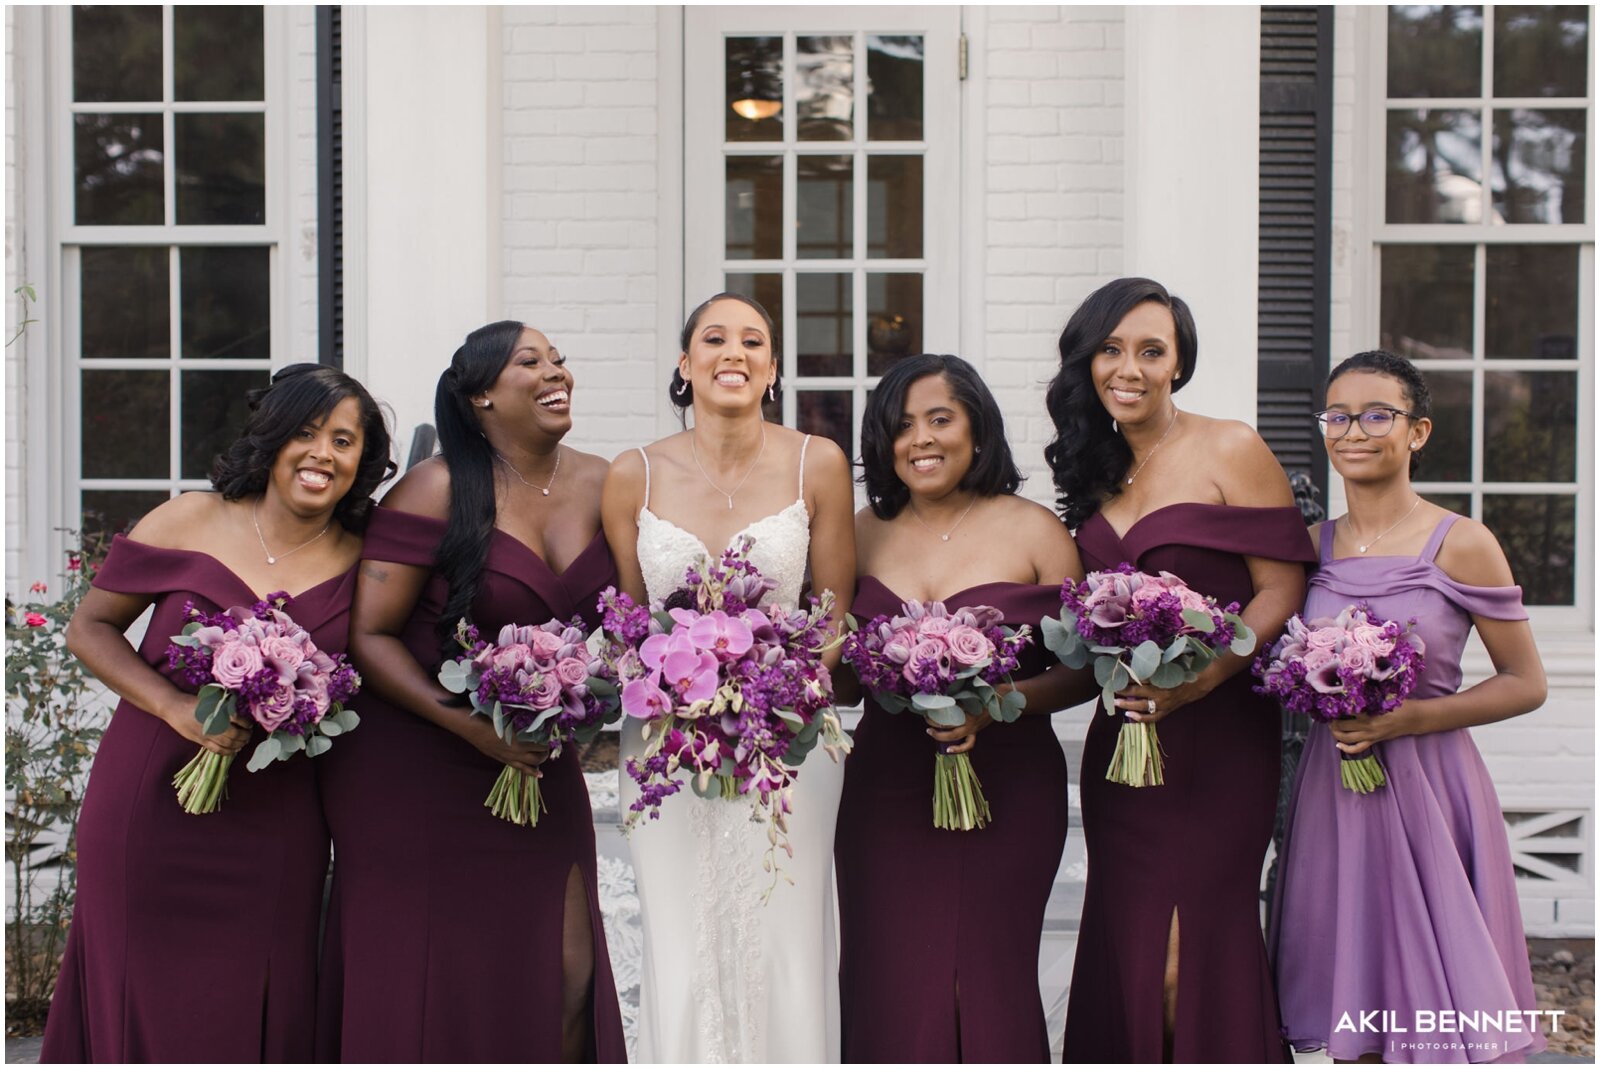  bridesmaids wearing lavender dresses and holding bridal bouquets 